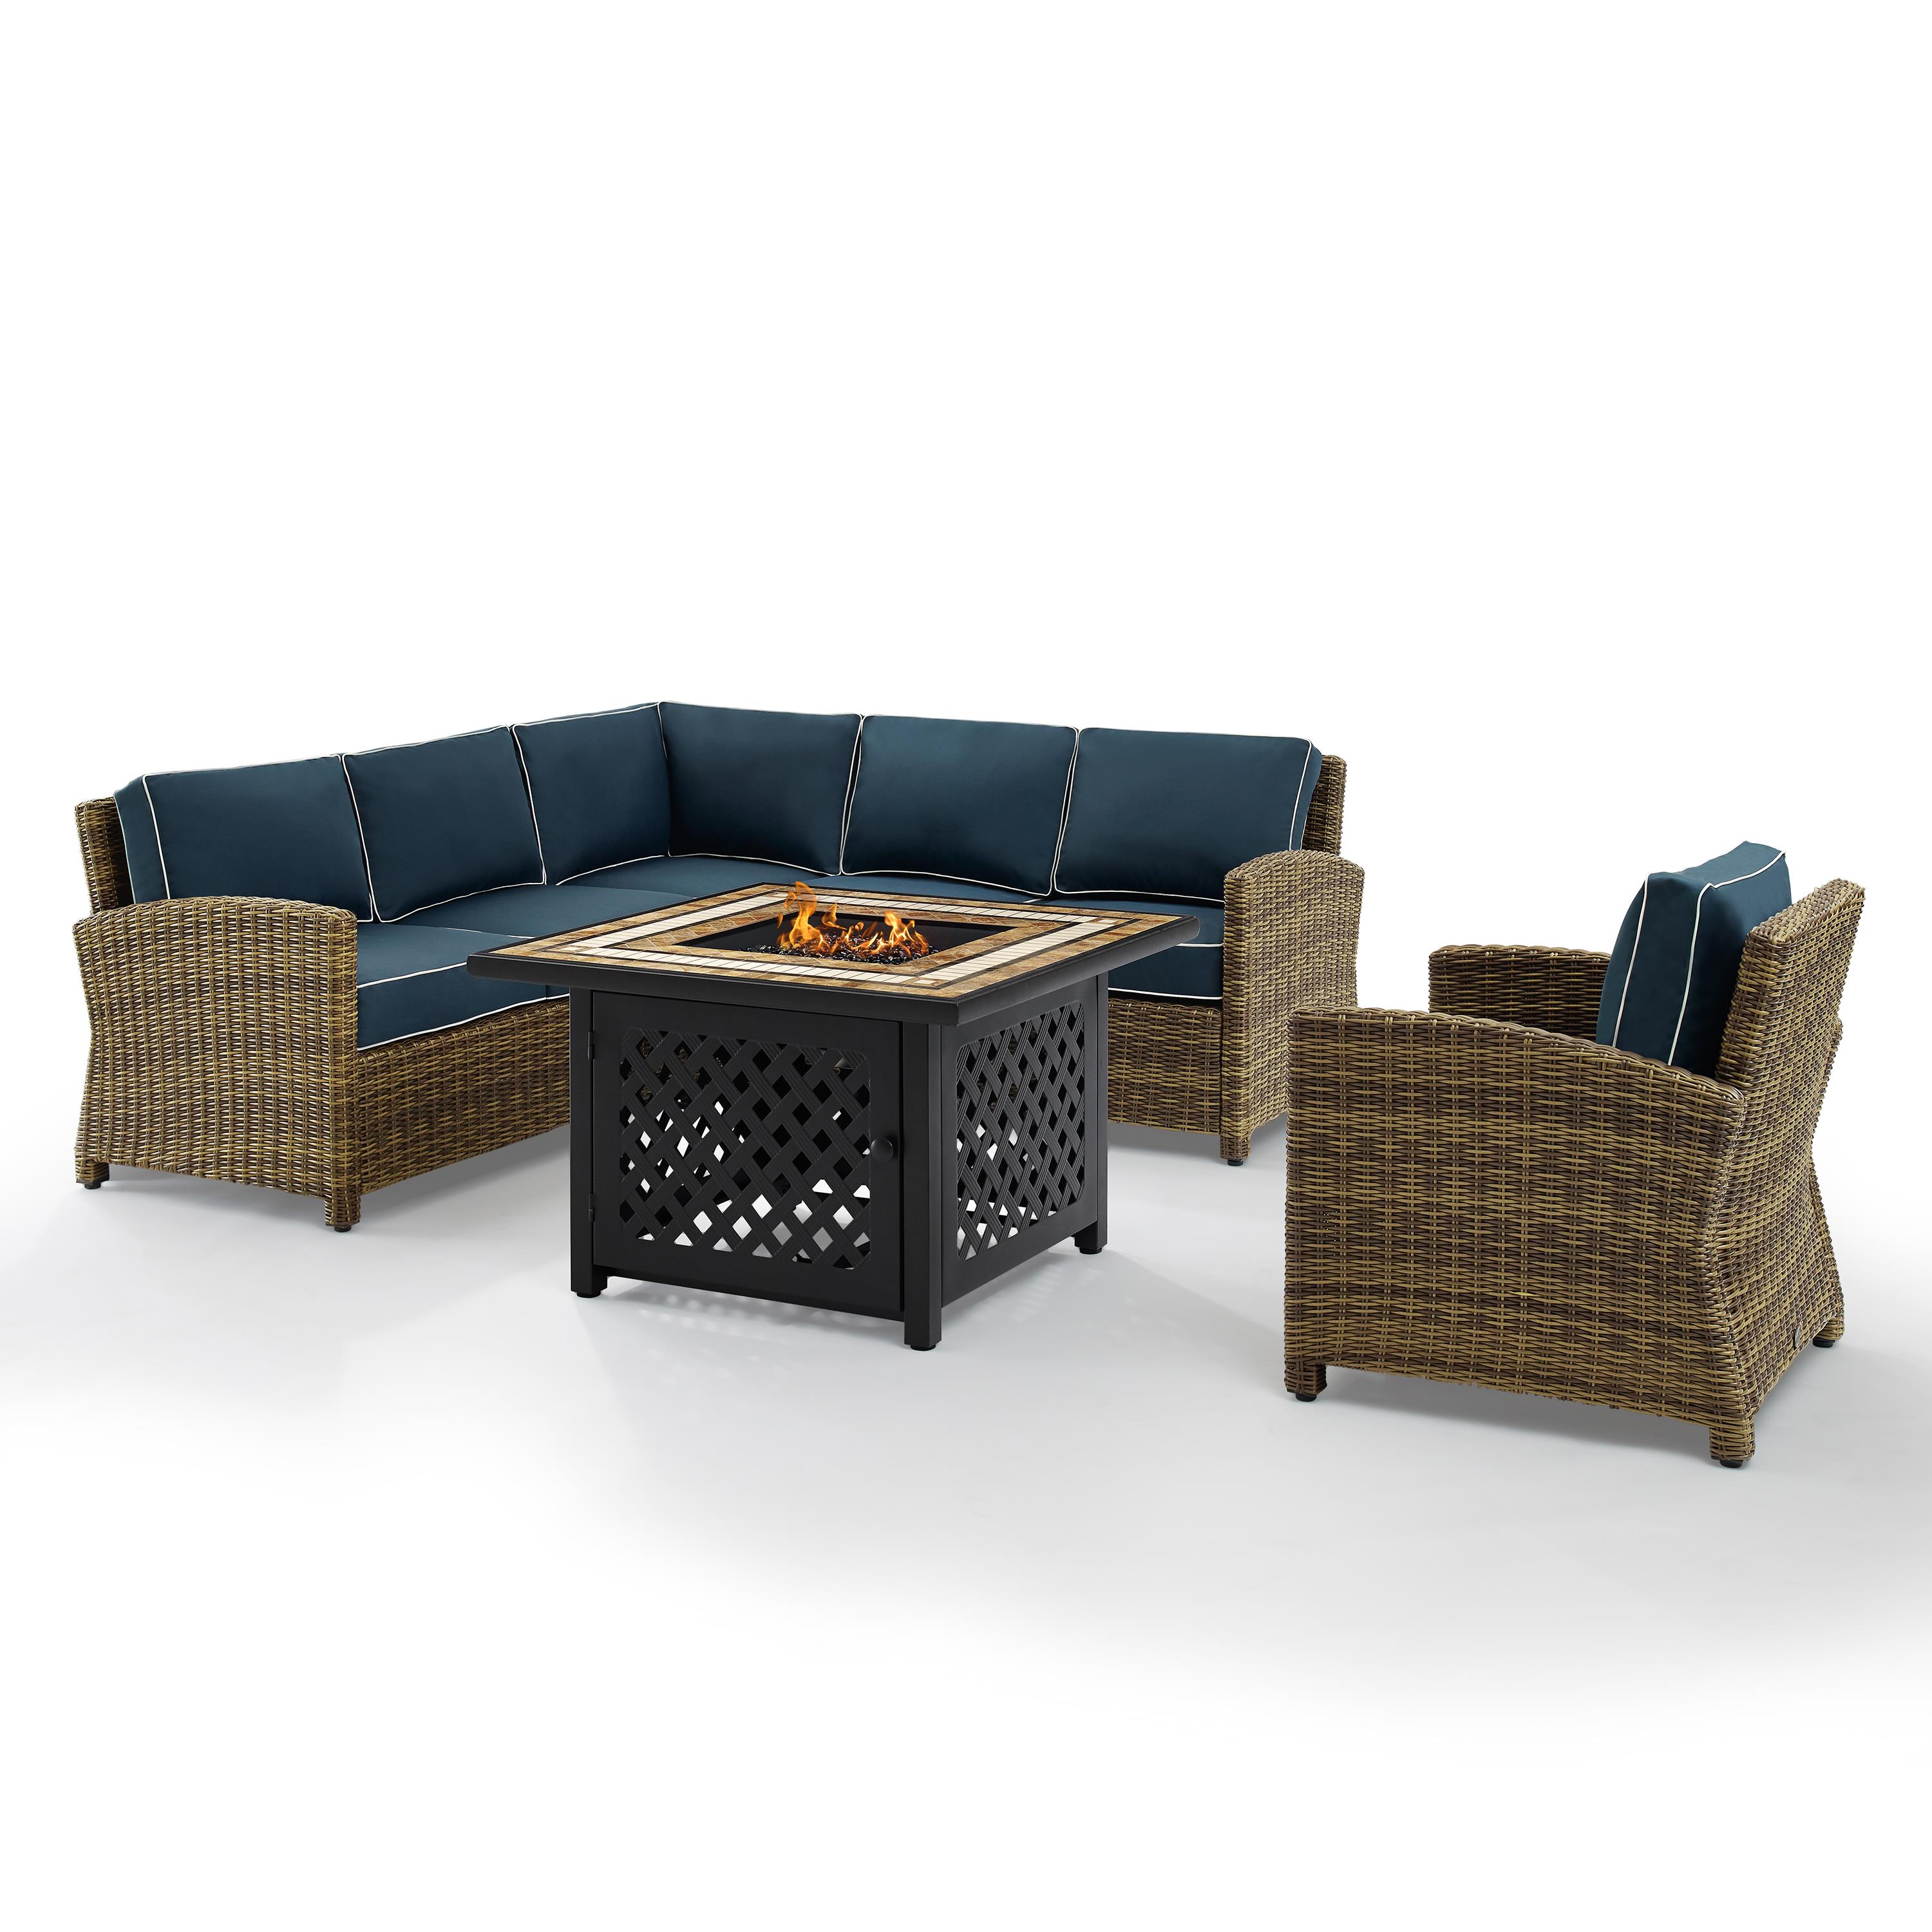 Bradenton 5Pc Outdoor Wicker Sectional Set W/Fire Table Weathered Brown/Navy - Right Corner Loveseat, Left Corner Loveseat, Corner Chair, Armchair, & Tucson Fire Table - image 4 of 9